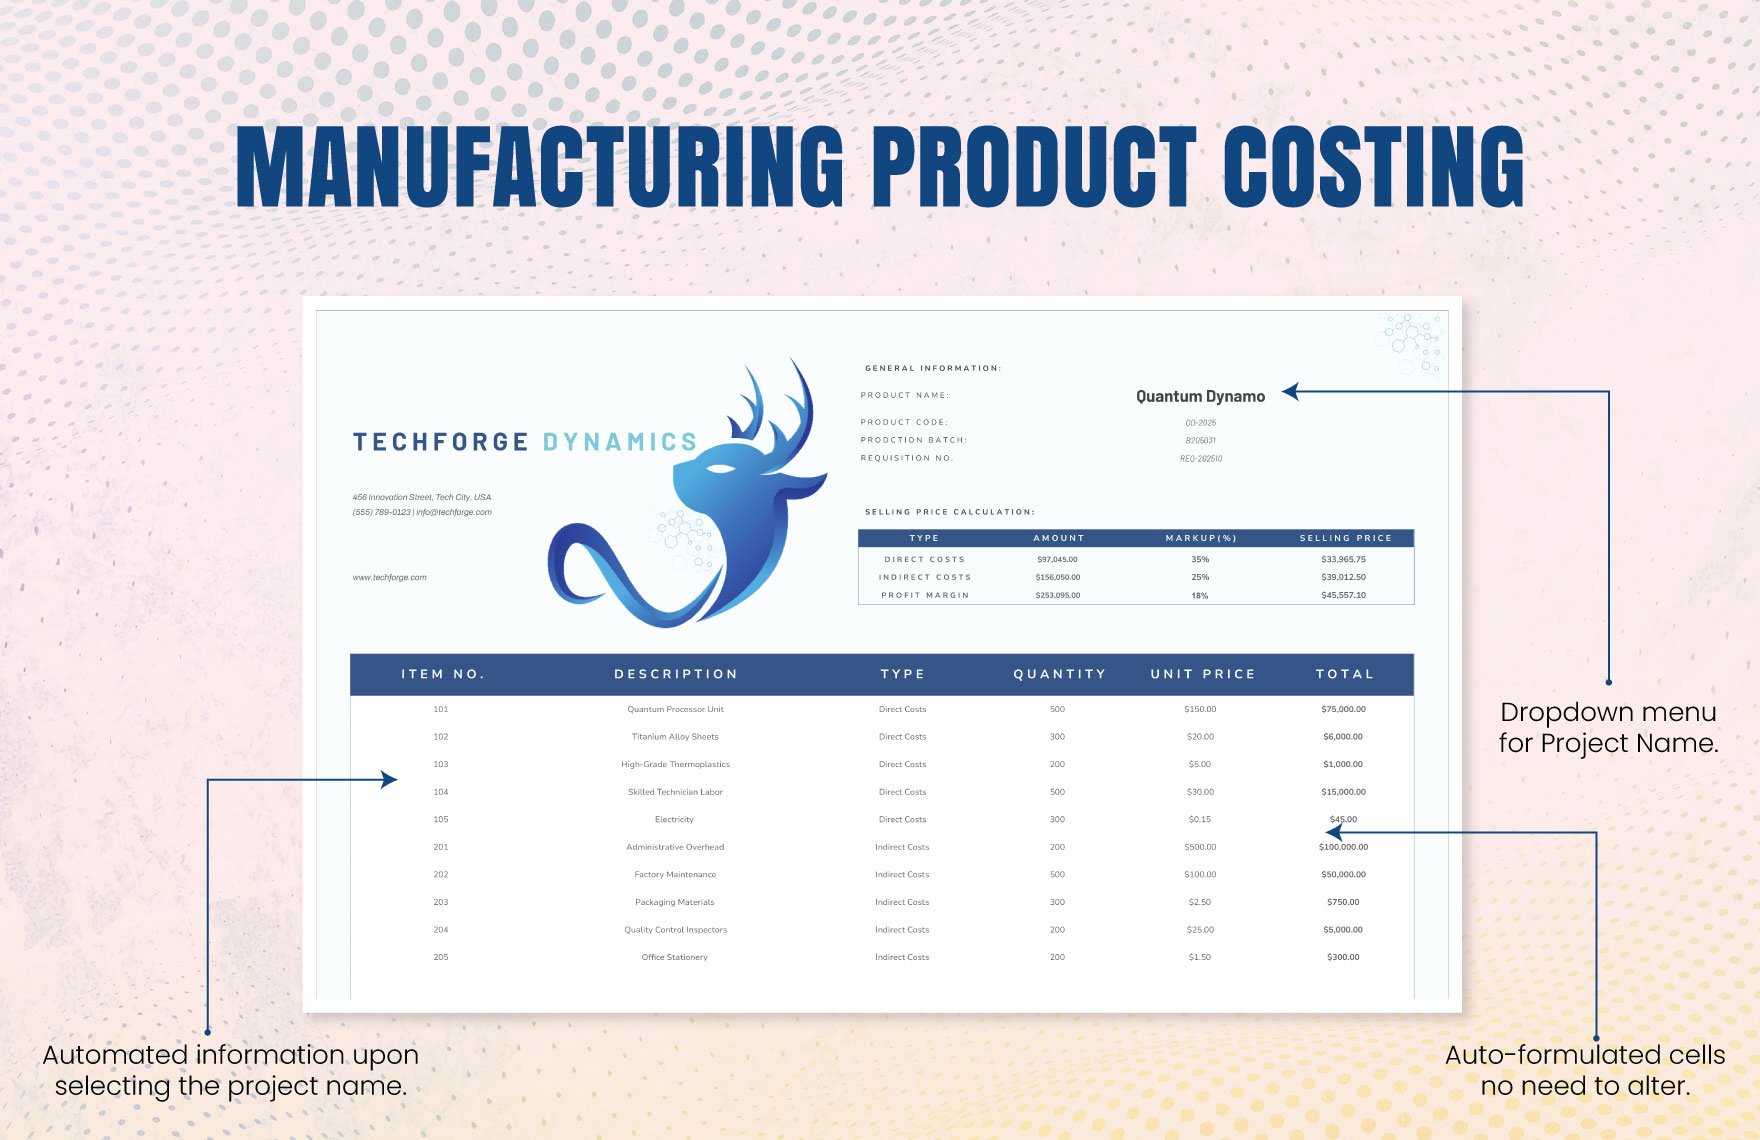 Manufacturing Product Costing Template